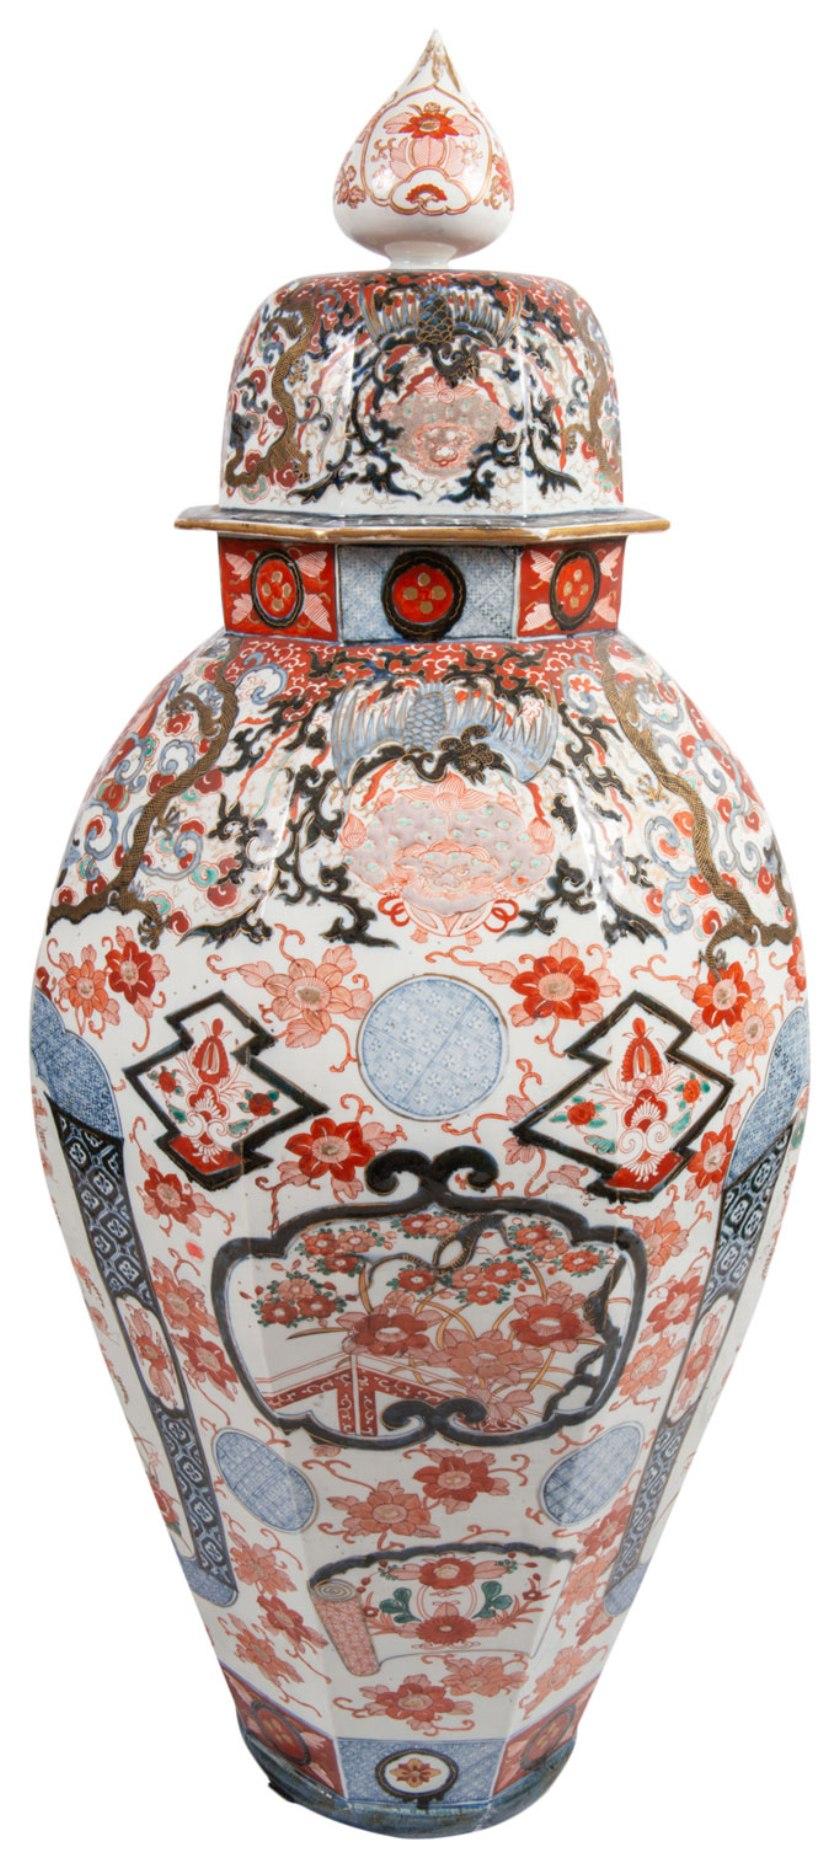 A very good quality 19th century Japanese Imari lidded vase, having the classical orange and blue ground, a tulip like finial to the lid, various motif and scrolling foliate decoration to the whole, inset hand painted panels depicting birds of prey